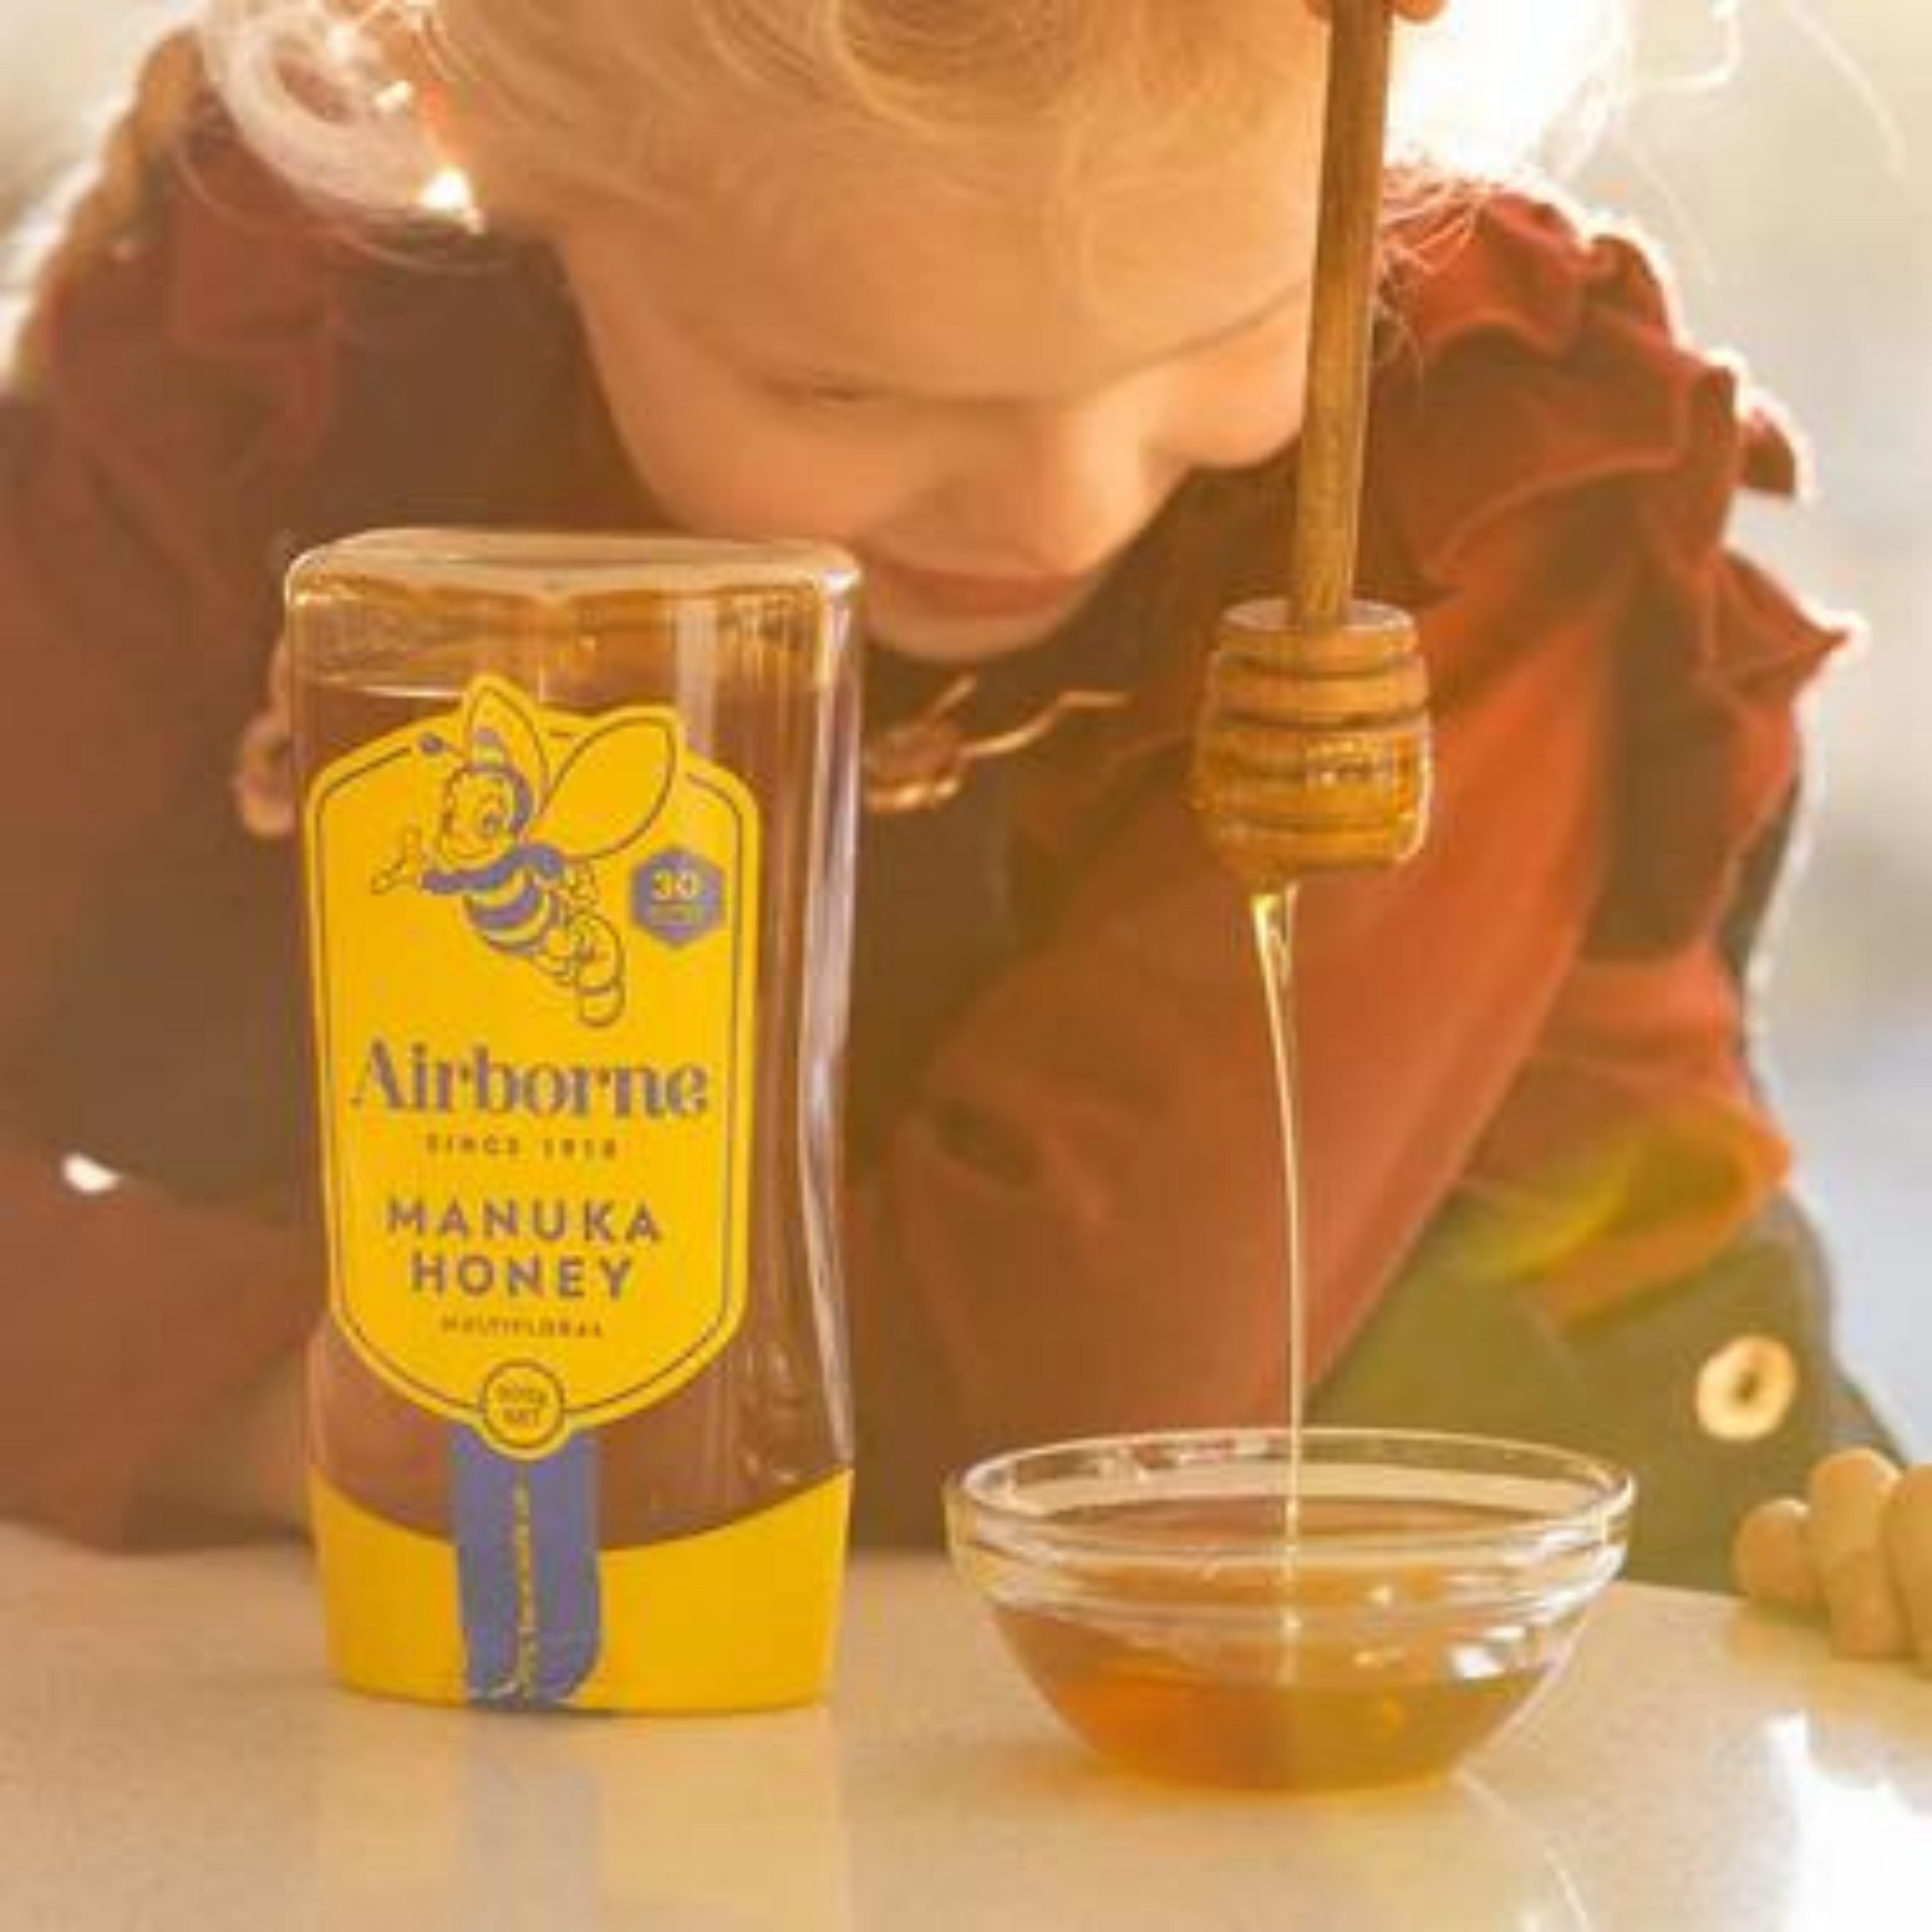 Boost your daily health with Airborne Manuka Multifloral Honey. Halal suitable best imported foreign Australian Aussie genuine authentic premium sweet natural pure healthy fitness tasty delicious quality safe ashol modhu moja original real cheap price in Dhaka Chittagong Sylhet Rajshahi Barisal Bogra Comilla Bangladesh